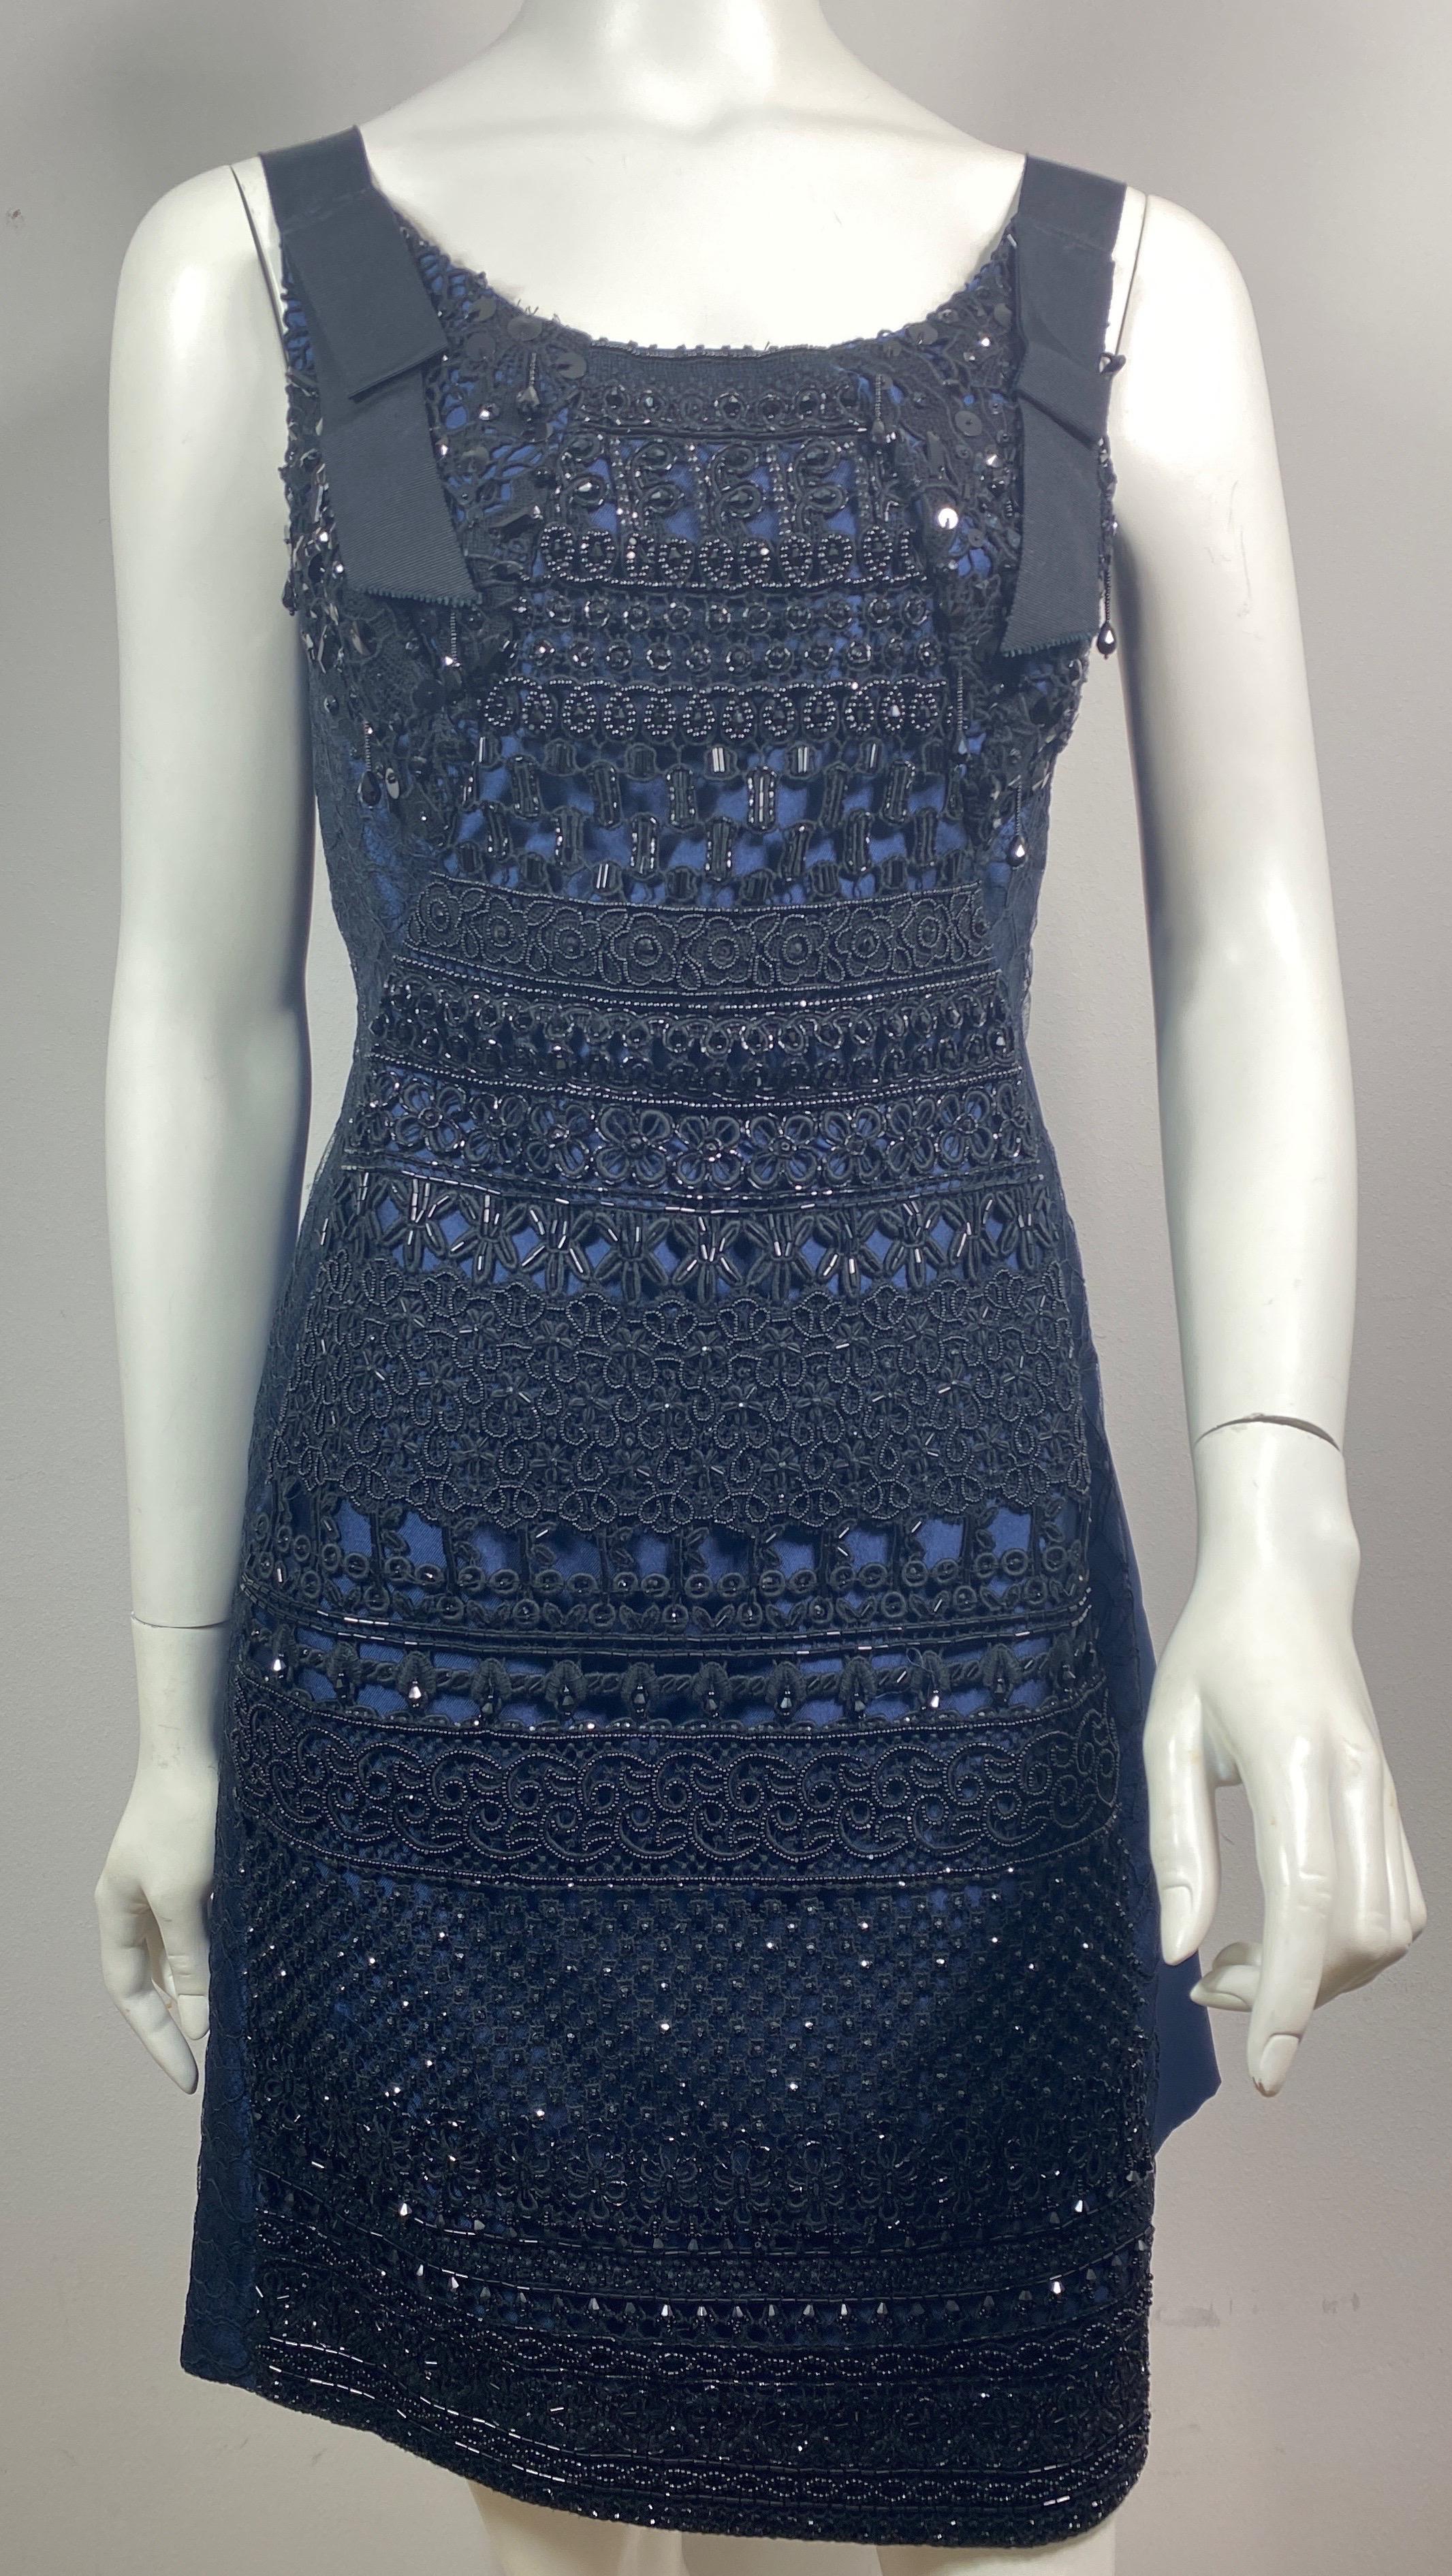 Oscar de La Renta Runway Resort 2016 Navy and Black Heavily Beaded Dress-Size 4 In Excellent Condition For Sale In West Palm Beach, FL